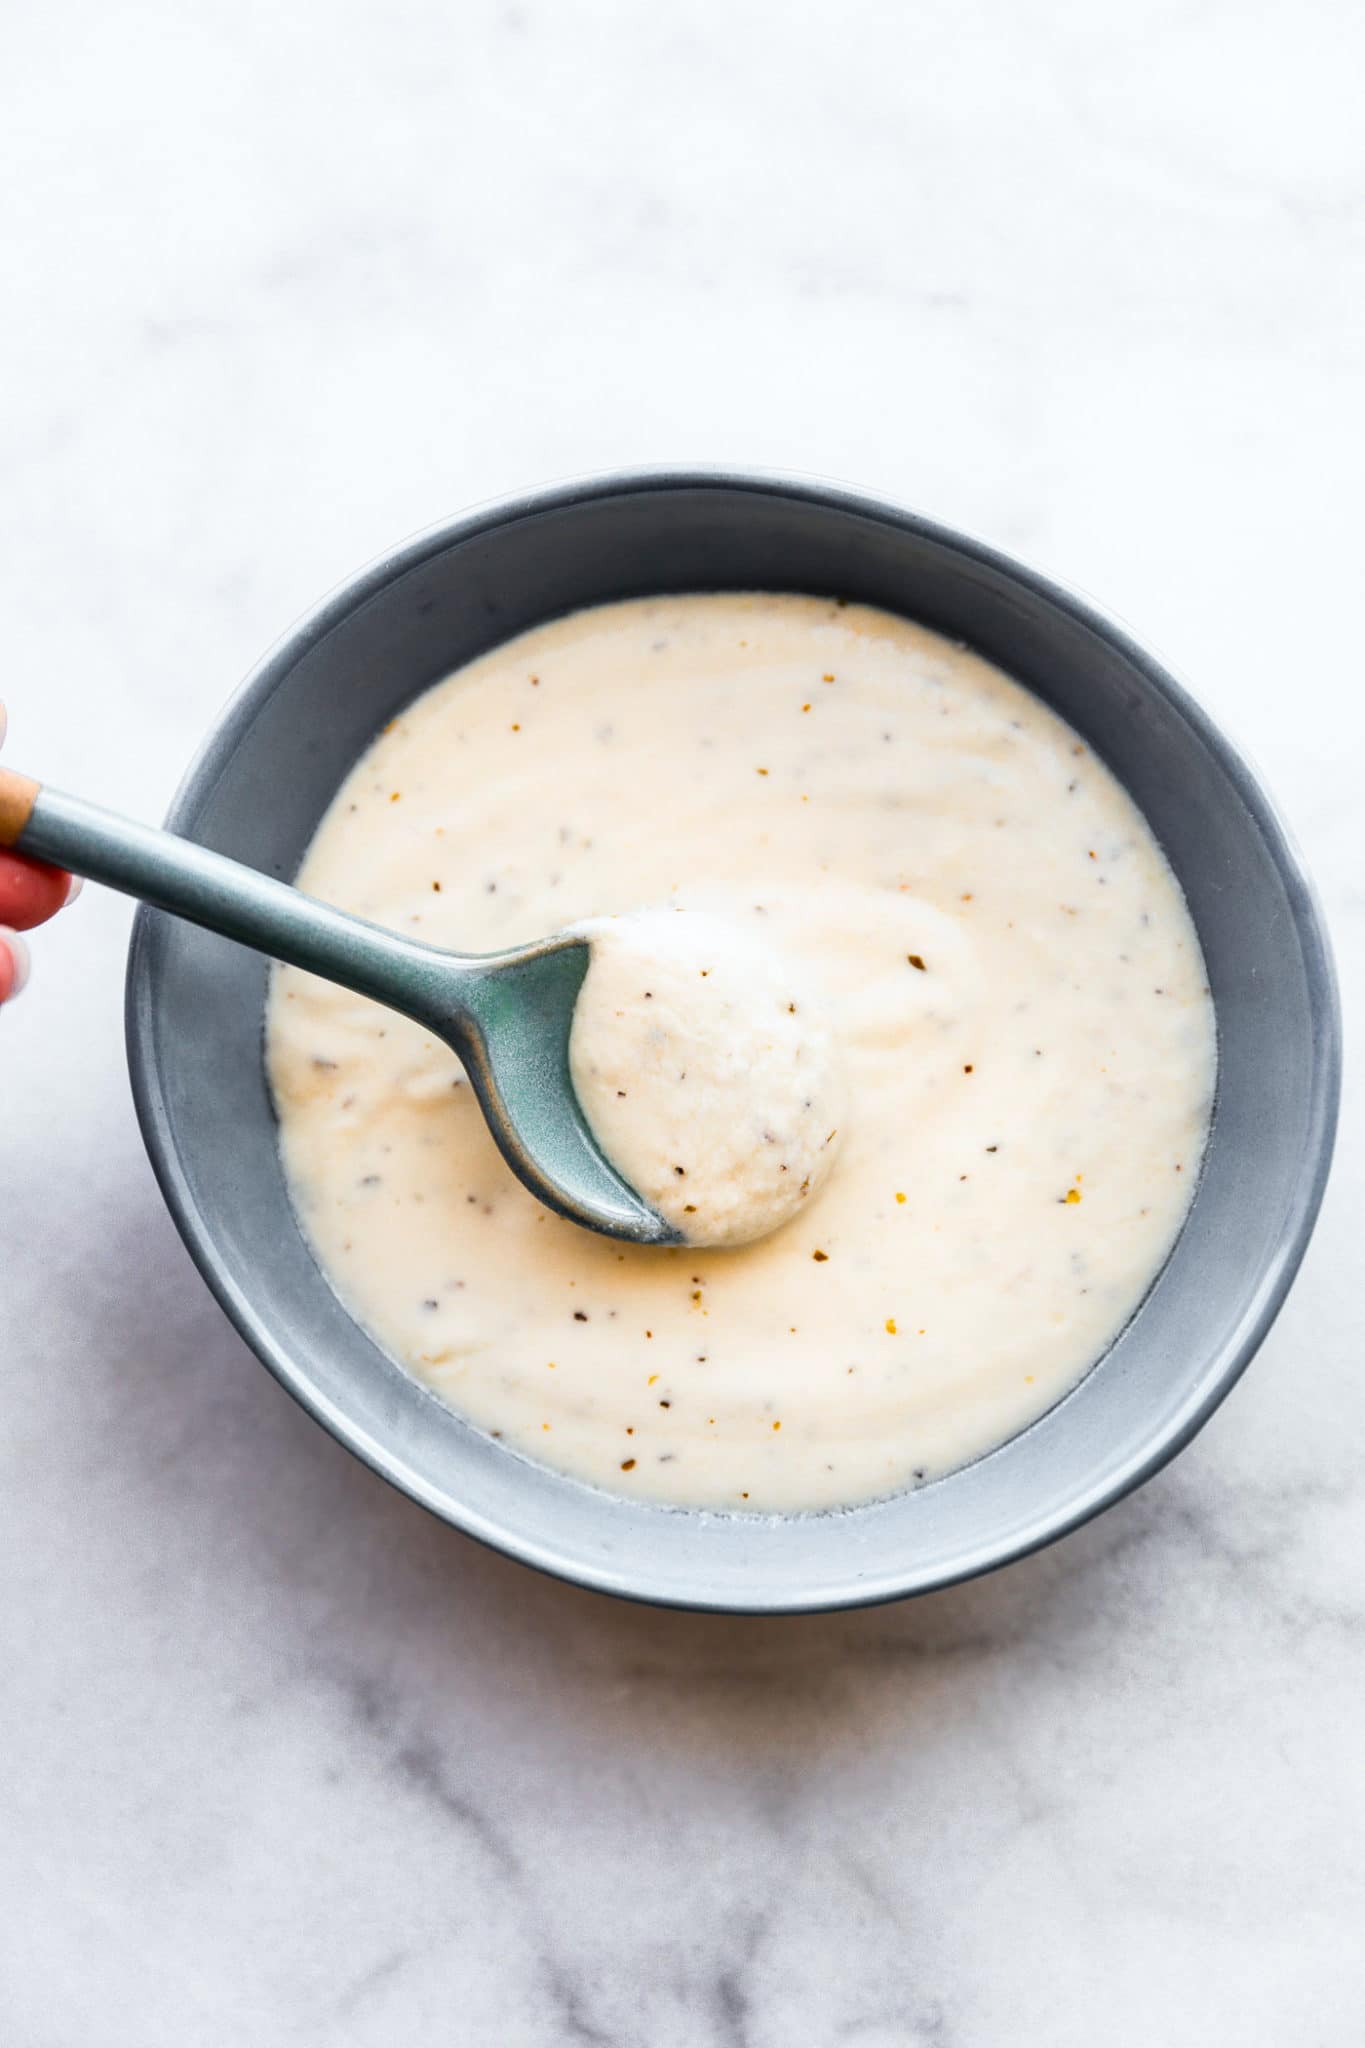 Homemade alfredo sauce in a gray bowl being dipped with a gray spoon